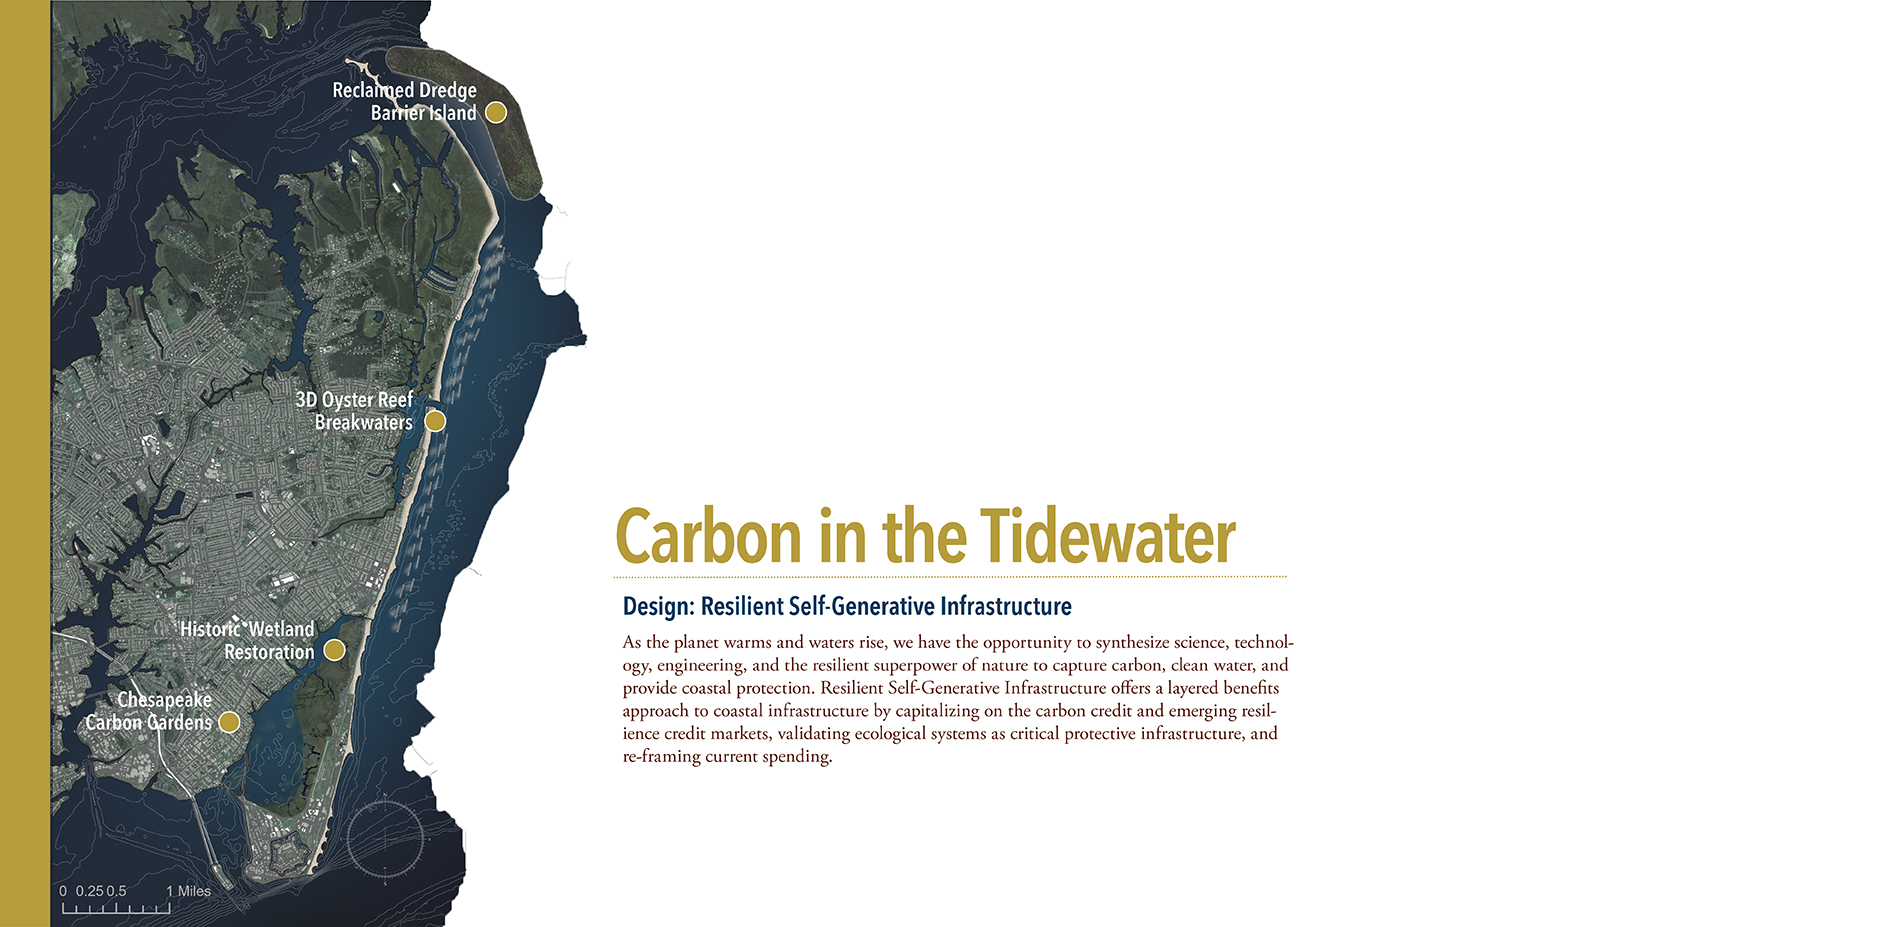 Carbon in the Tidewater